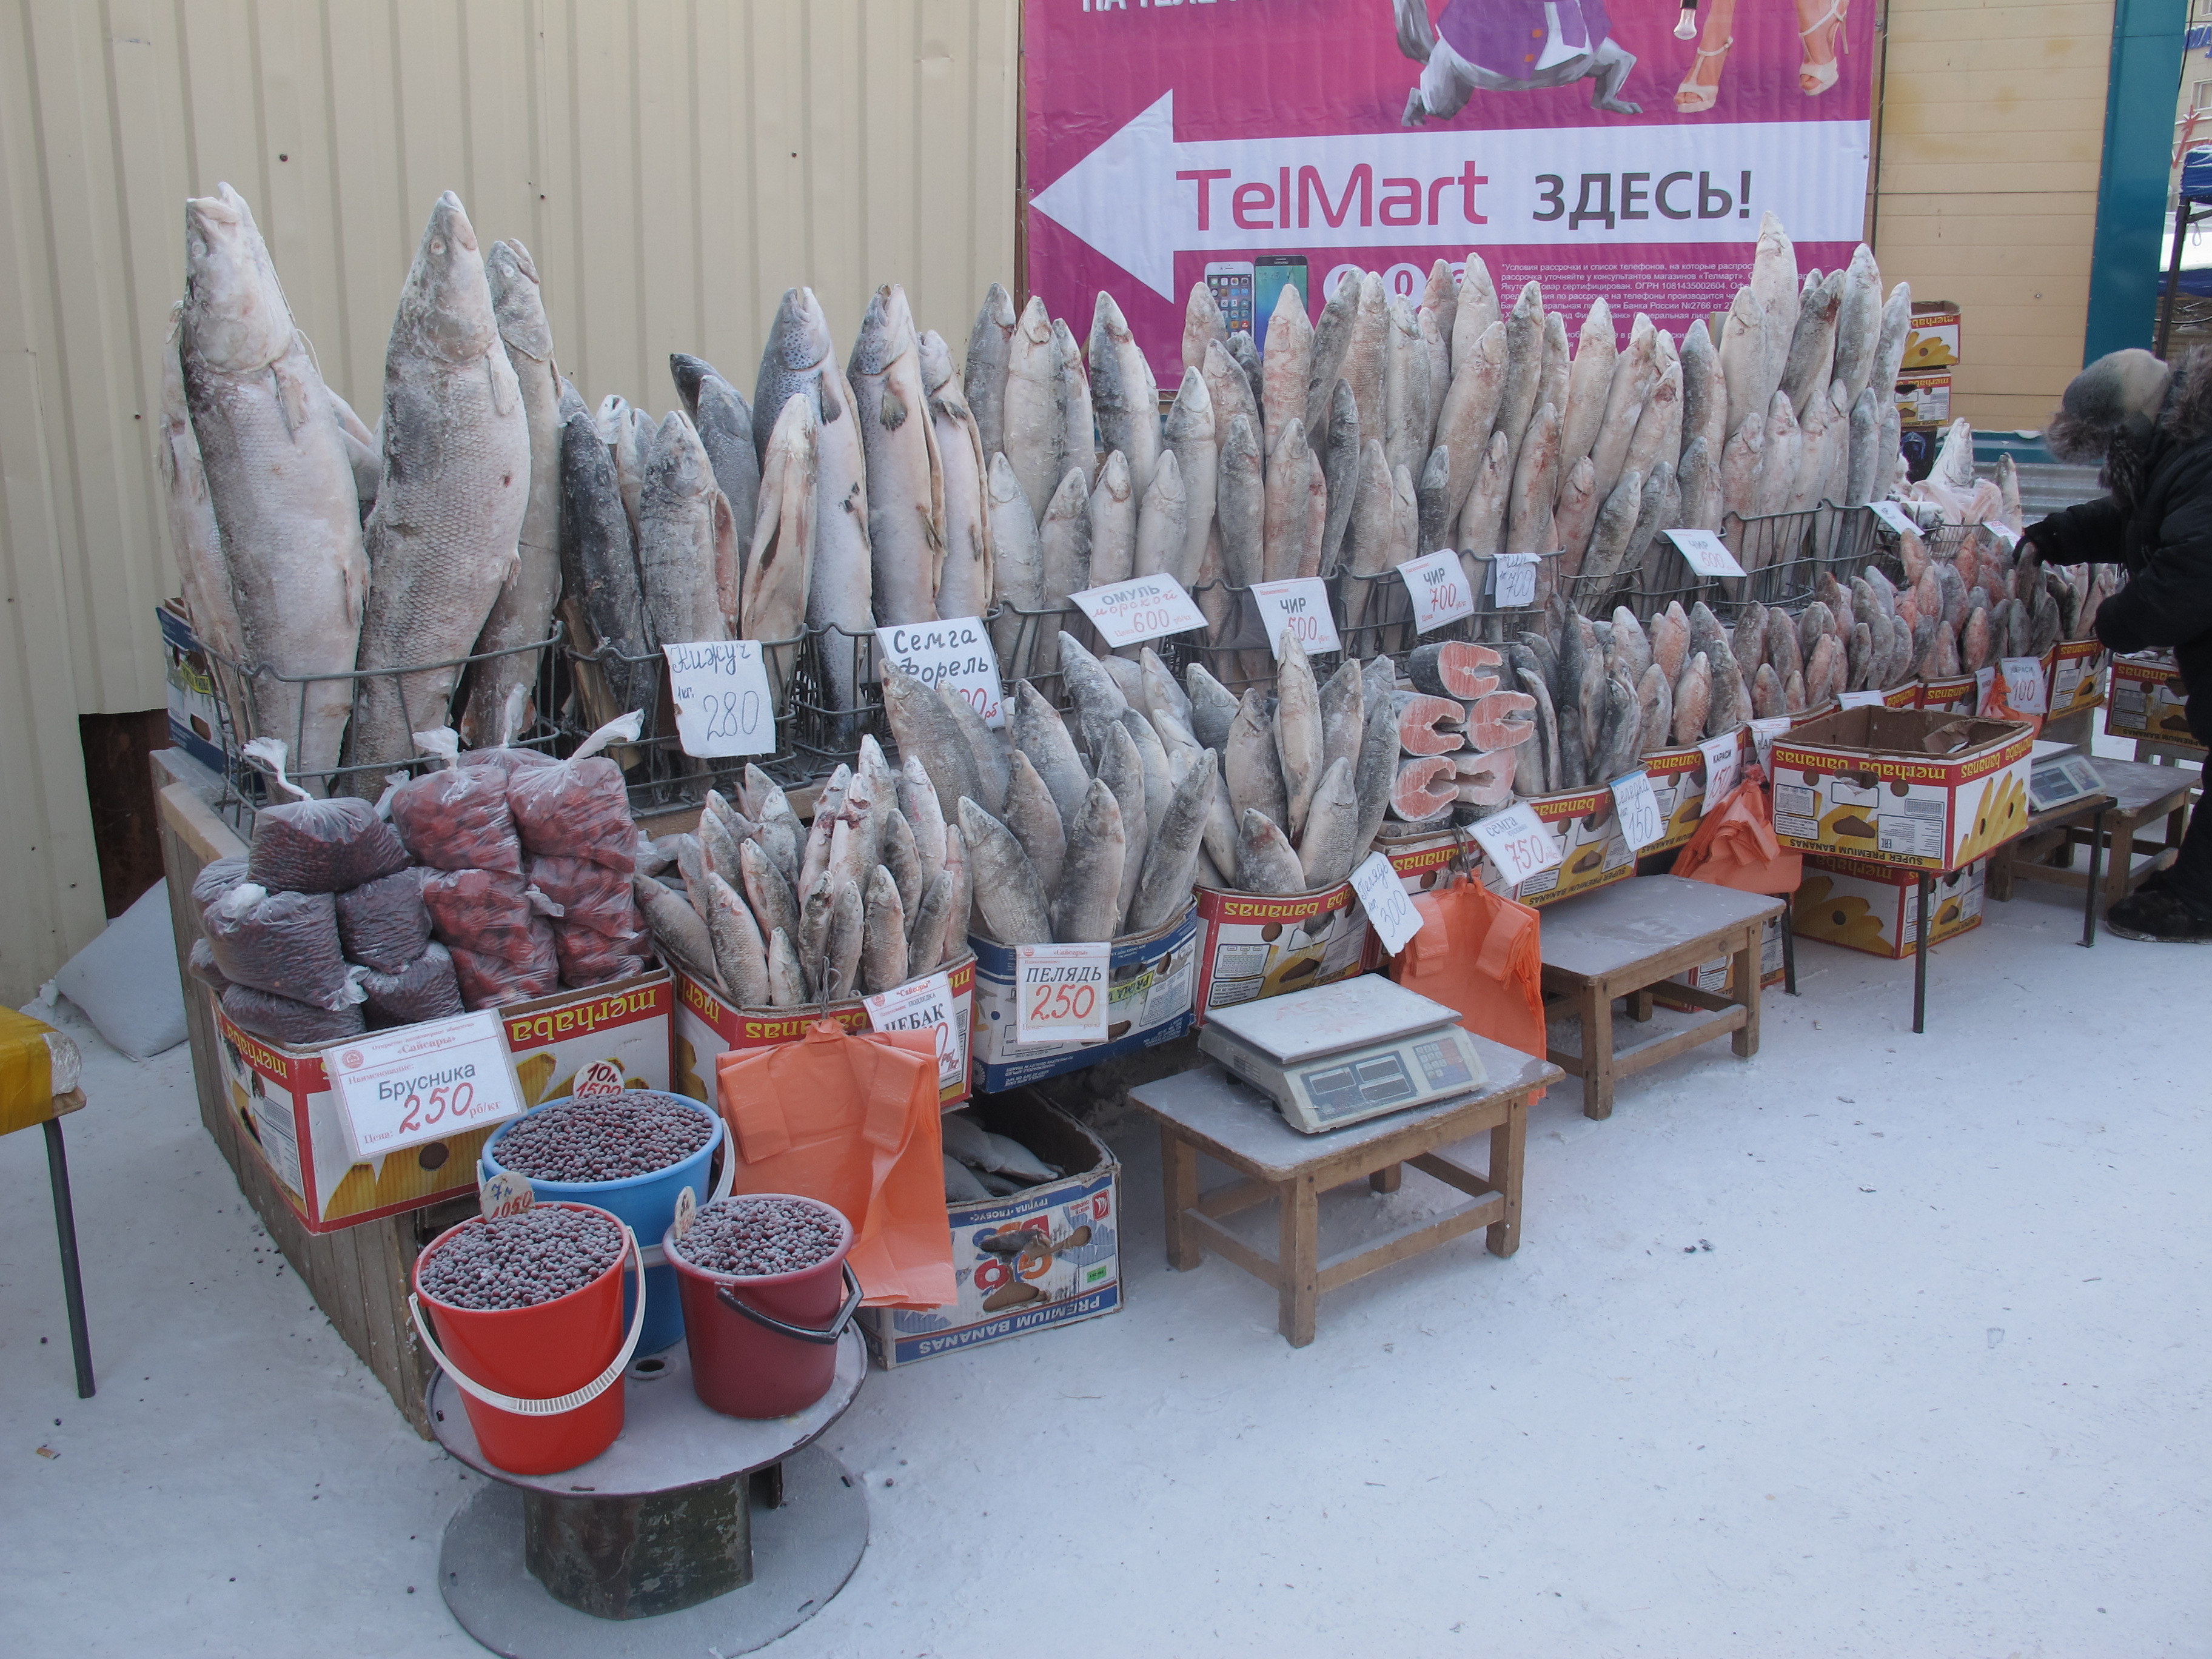 Fish sold at an outdoor market in winter